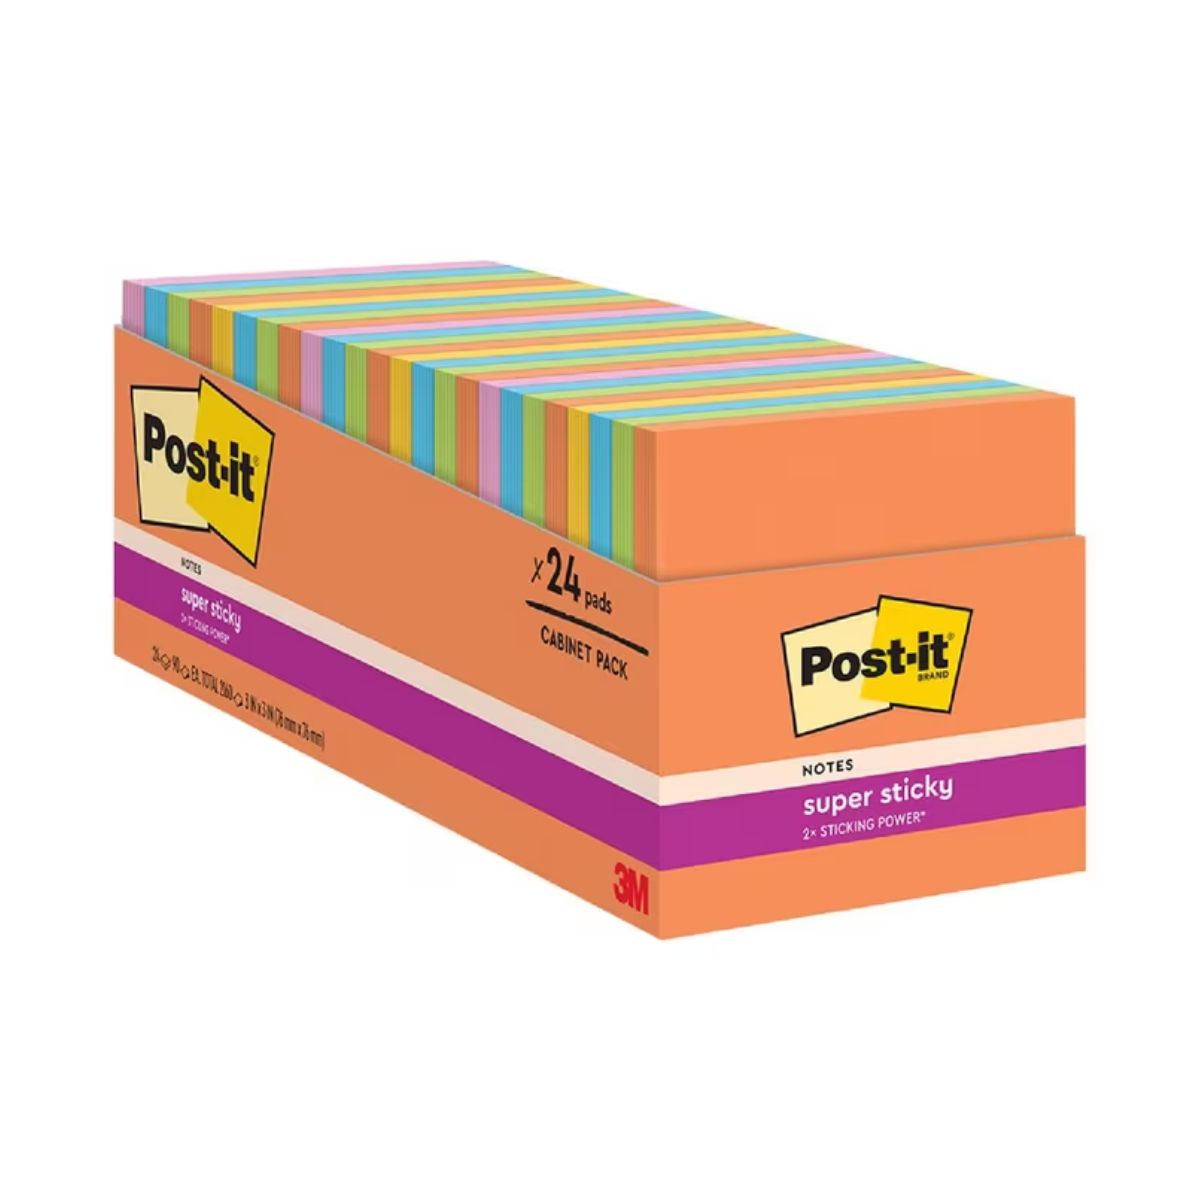 3M Post-it Super Sticky Rio De Janeiro Cabinet Pack 3in X 3in, 24 Pads/Pack